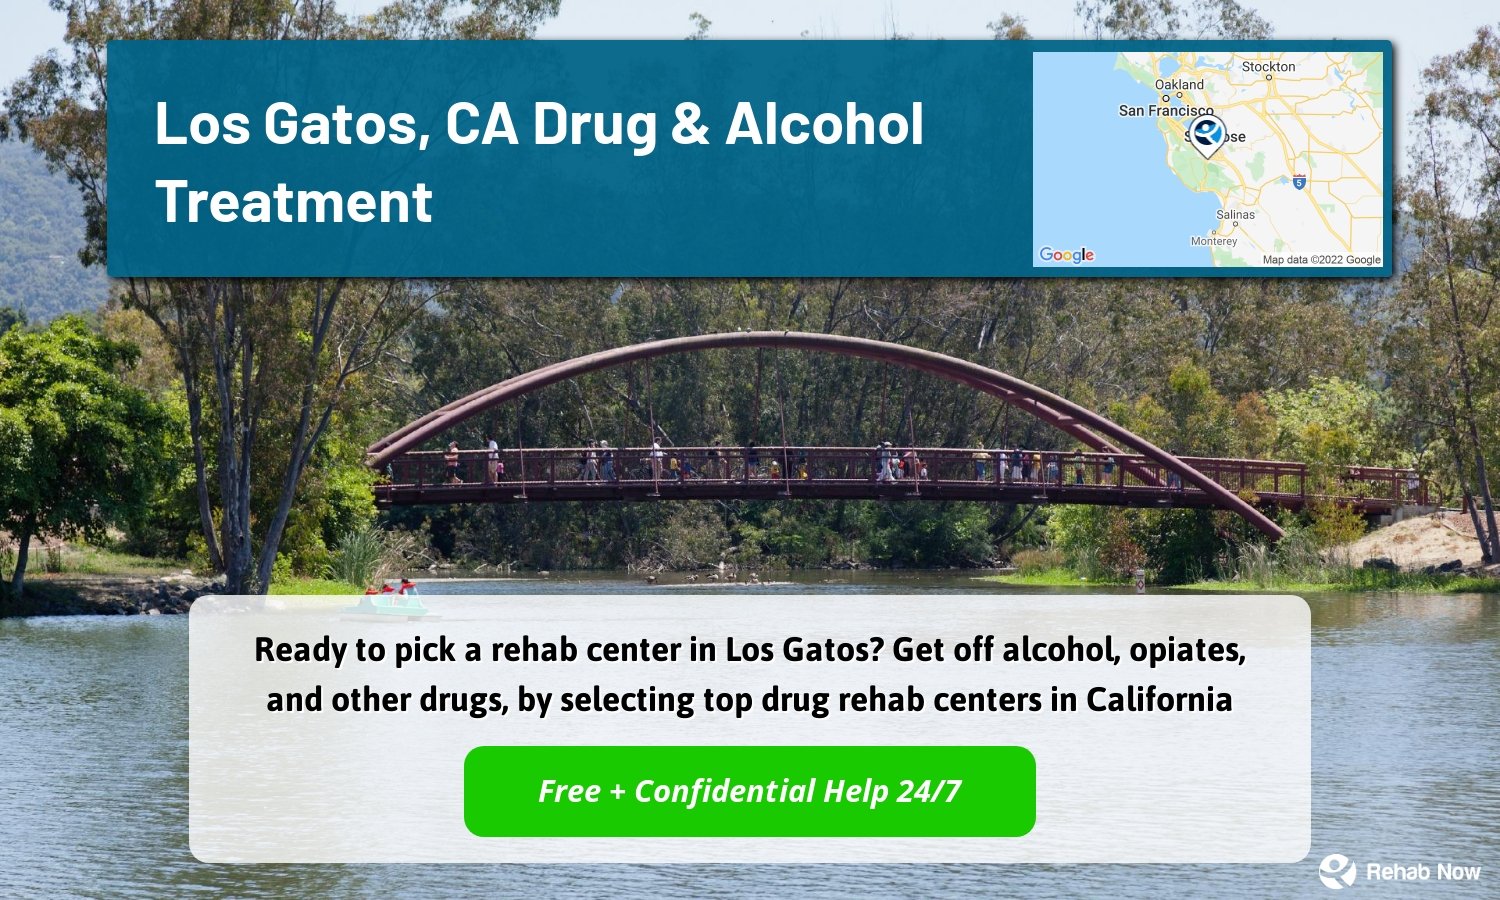 Ready to pick a rehab center in Los Gatos? Get off alcohol, opiates, and other drugs, by selecting top drug rehab centers in California